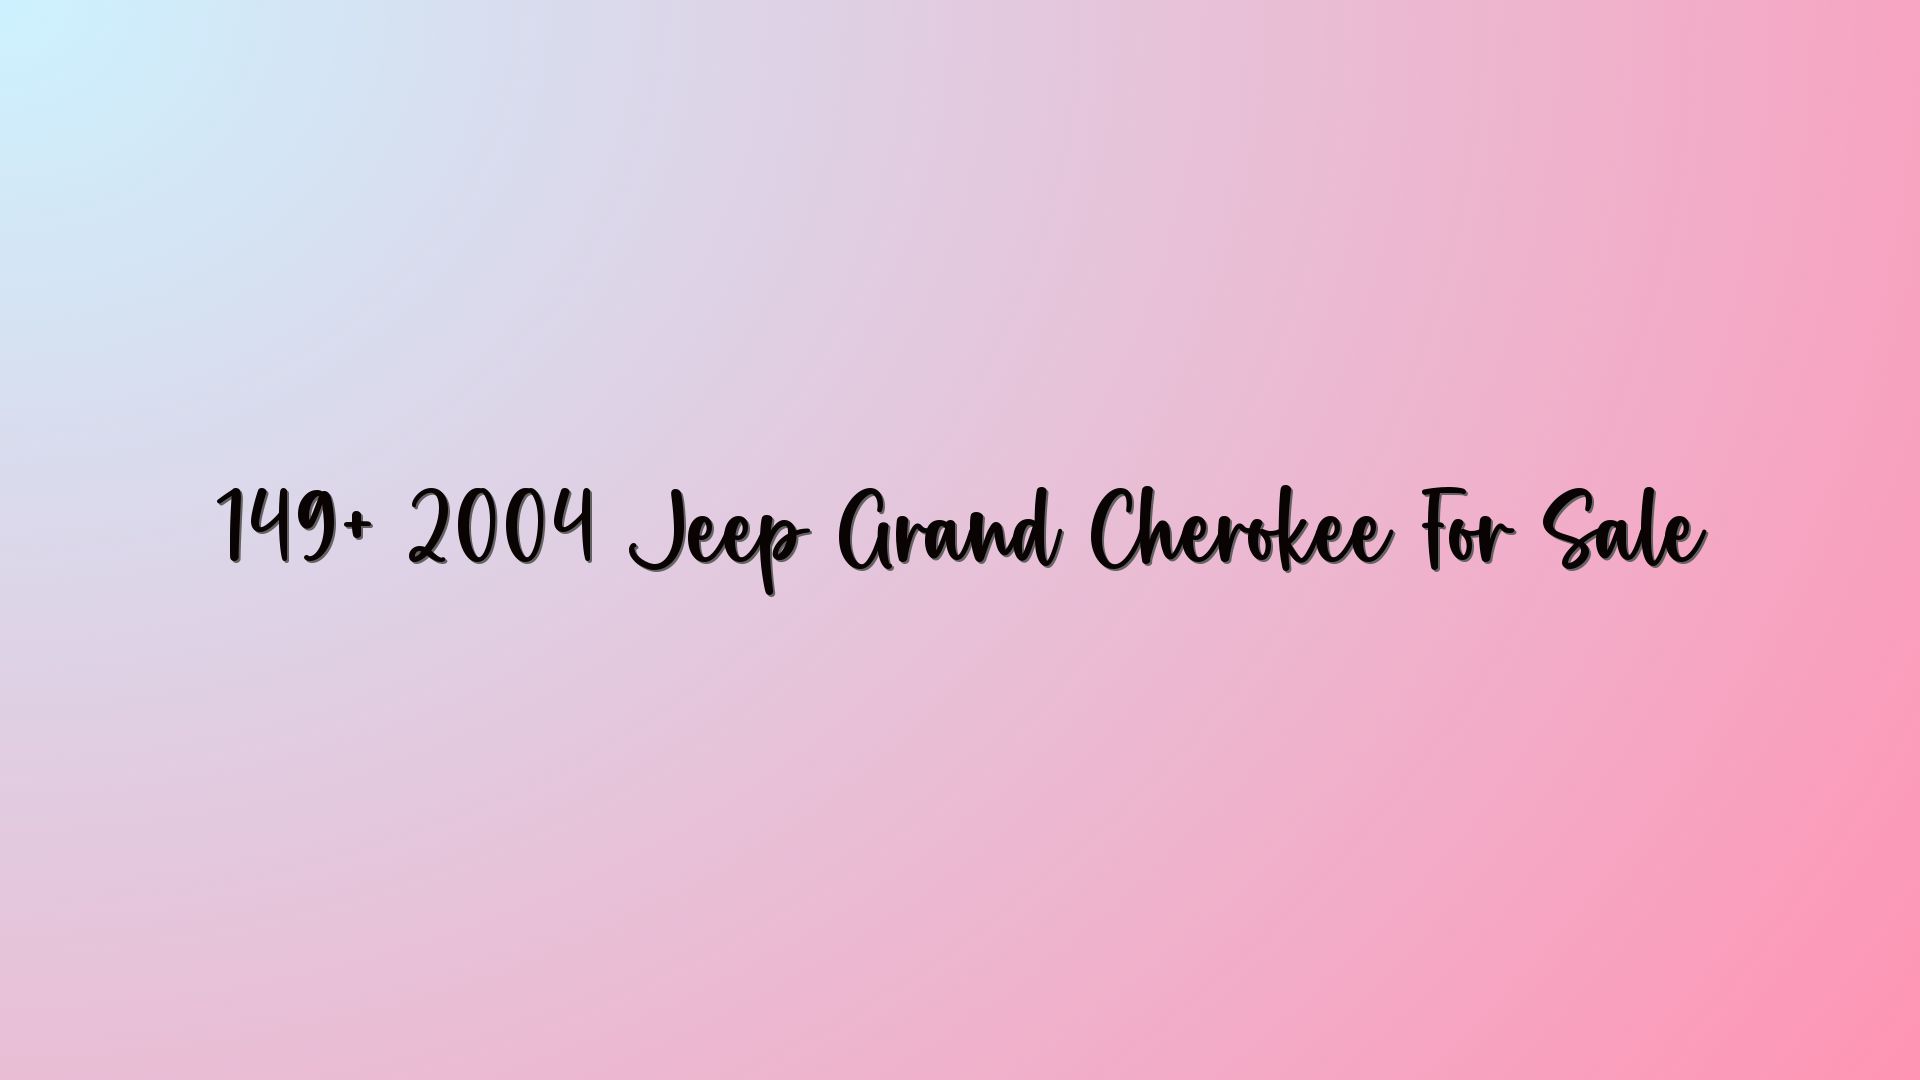 149+ 2004 Jeep Grand Cherokee For Sale